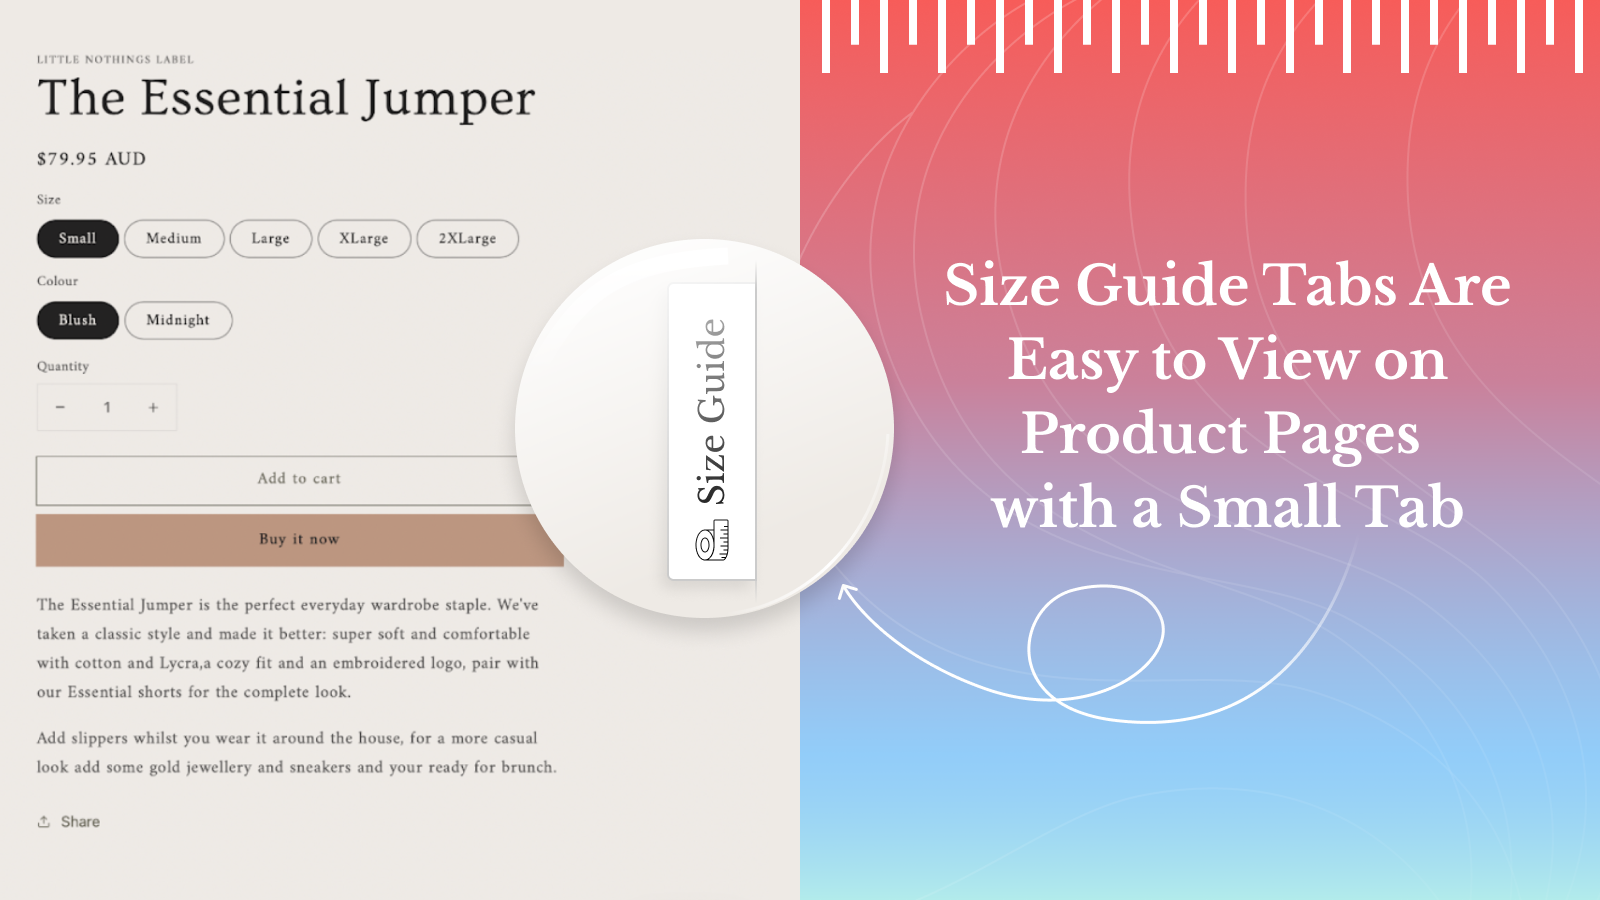 Size Guide tabs are easy to view on product pages